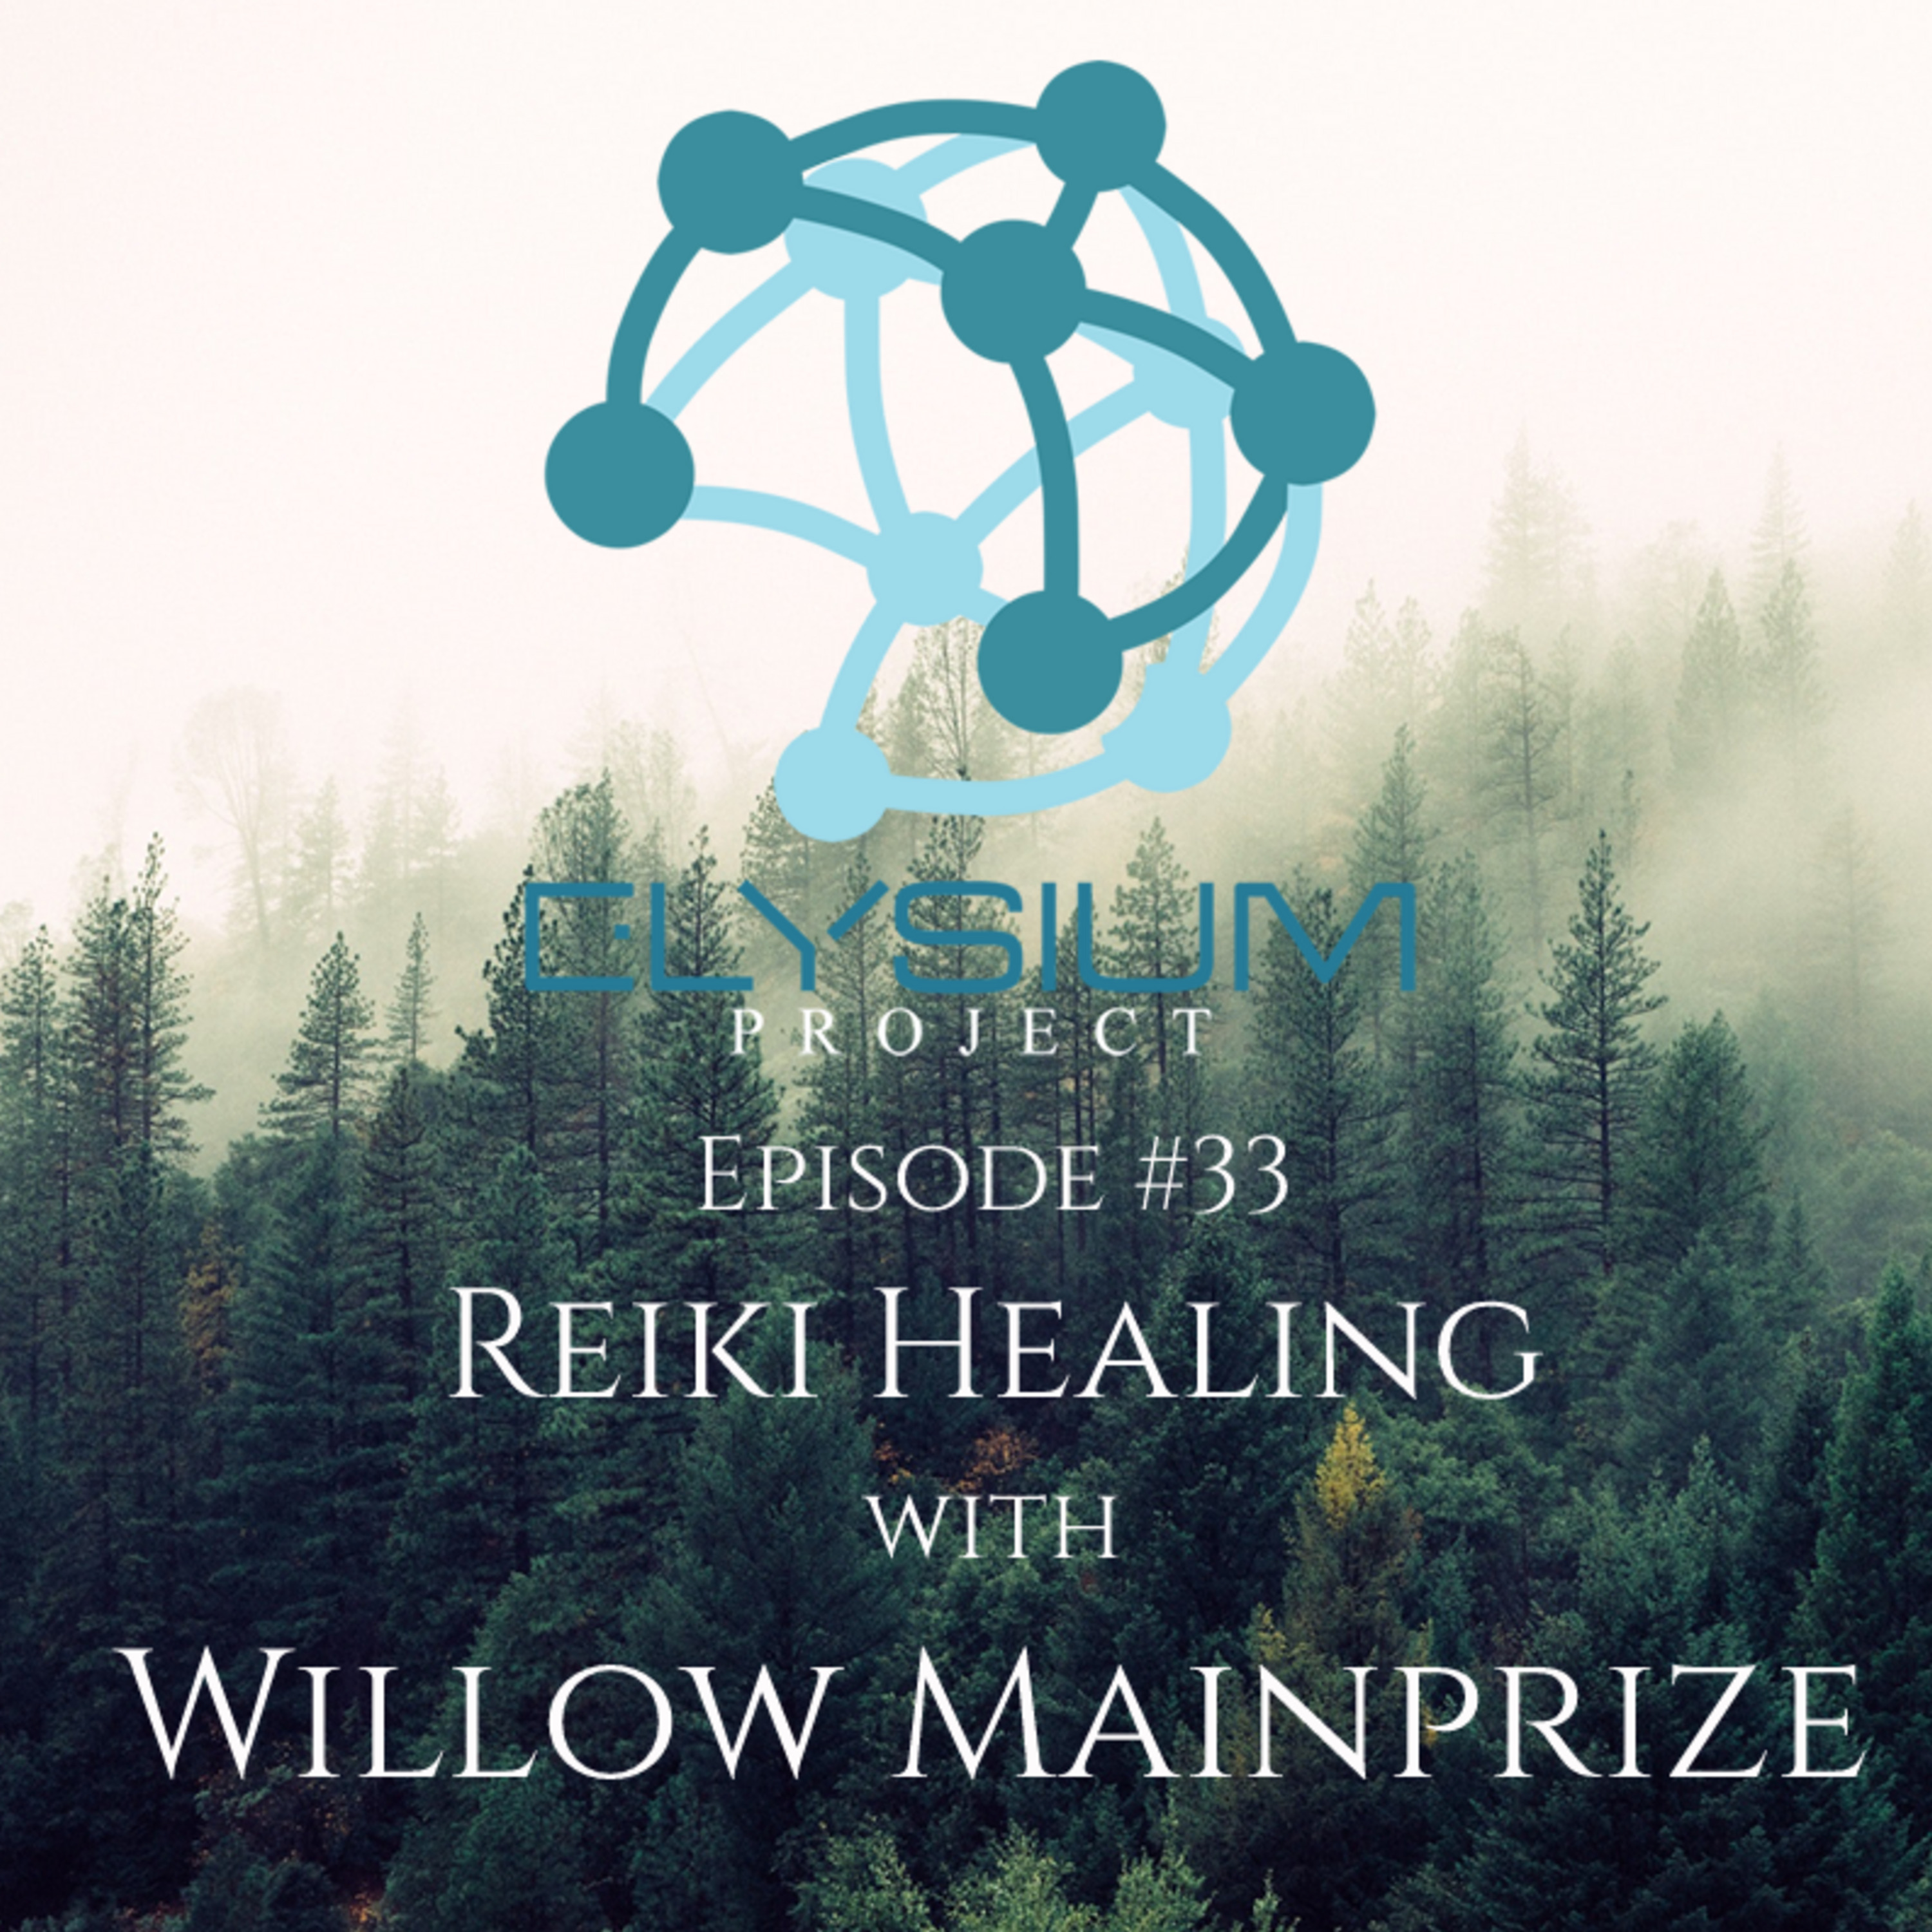 Episode 33: Reiki Healing with Willow Mainprize